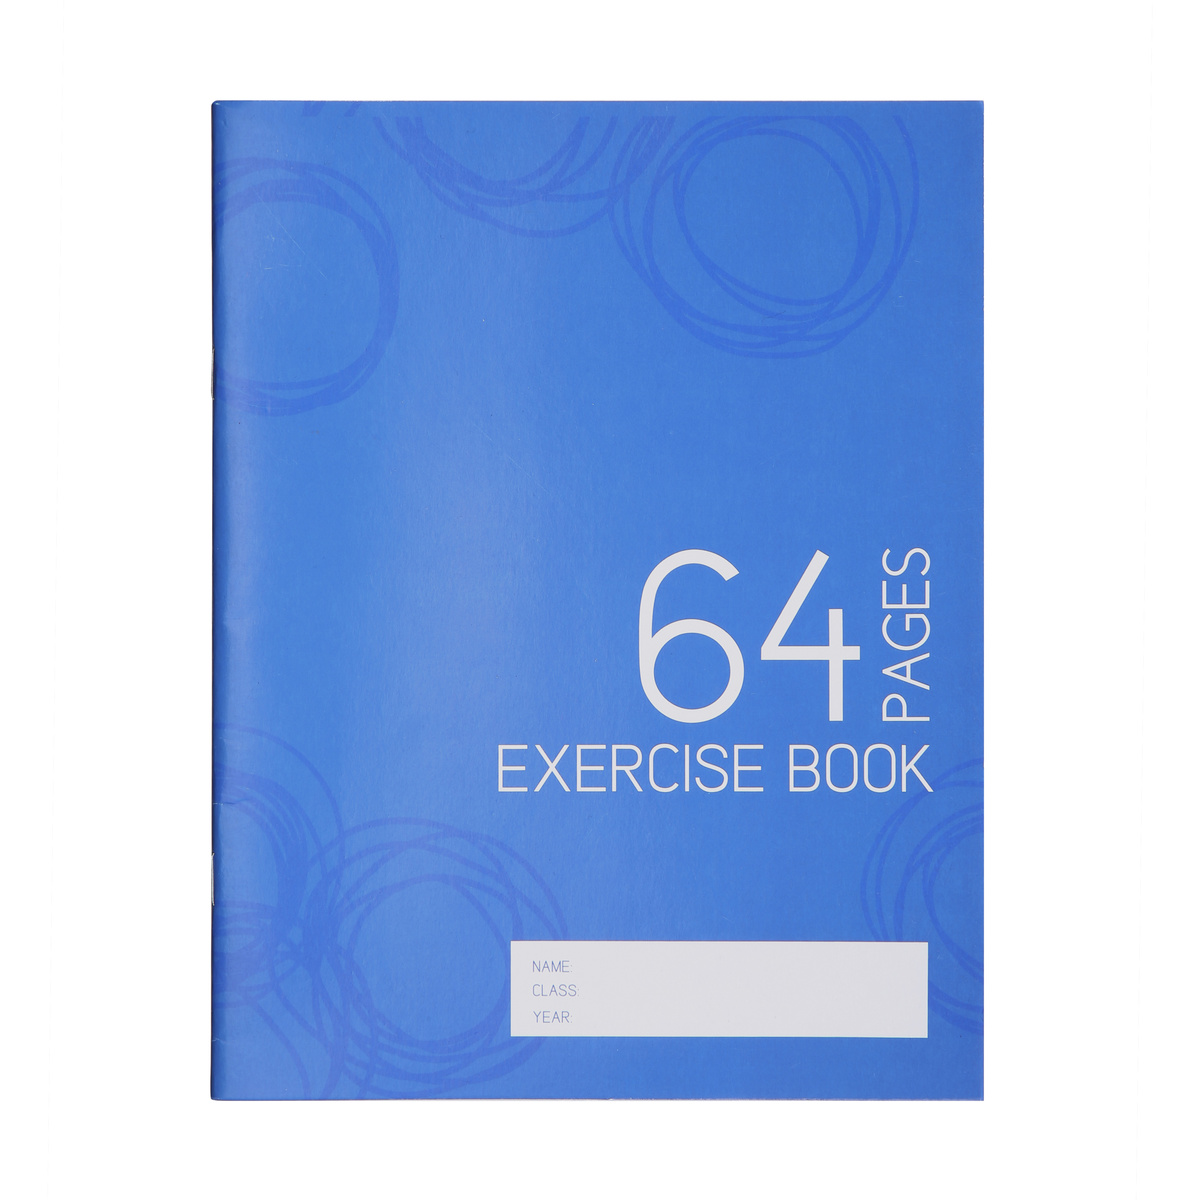 Exercise Book - 64 Pages